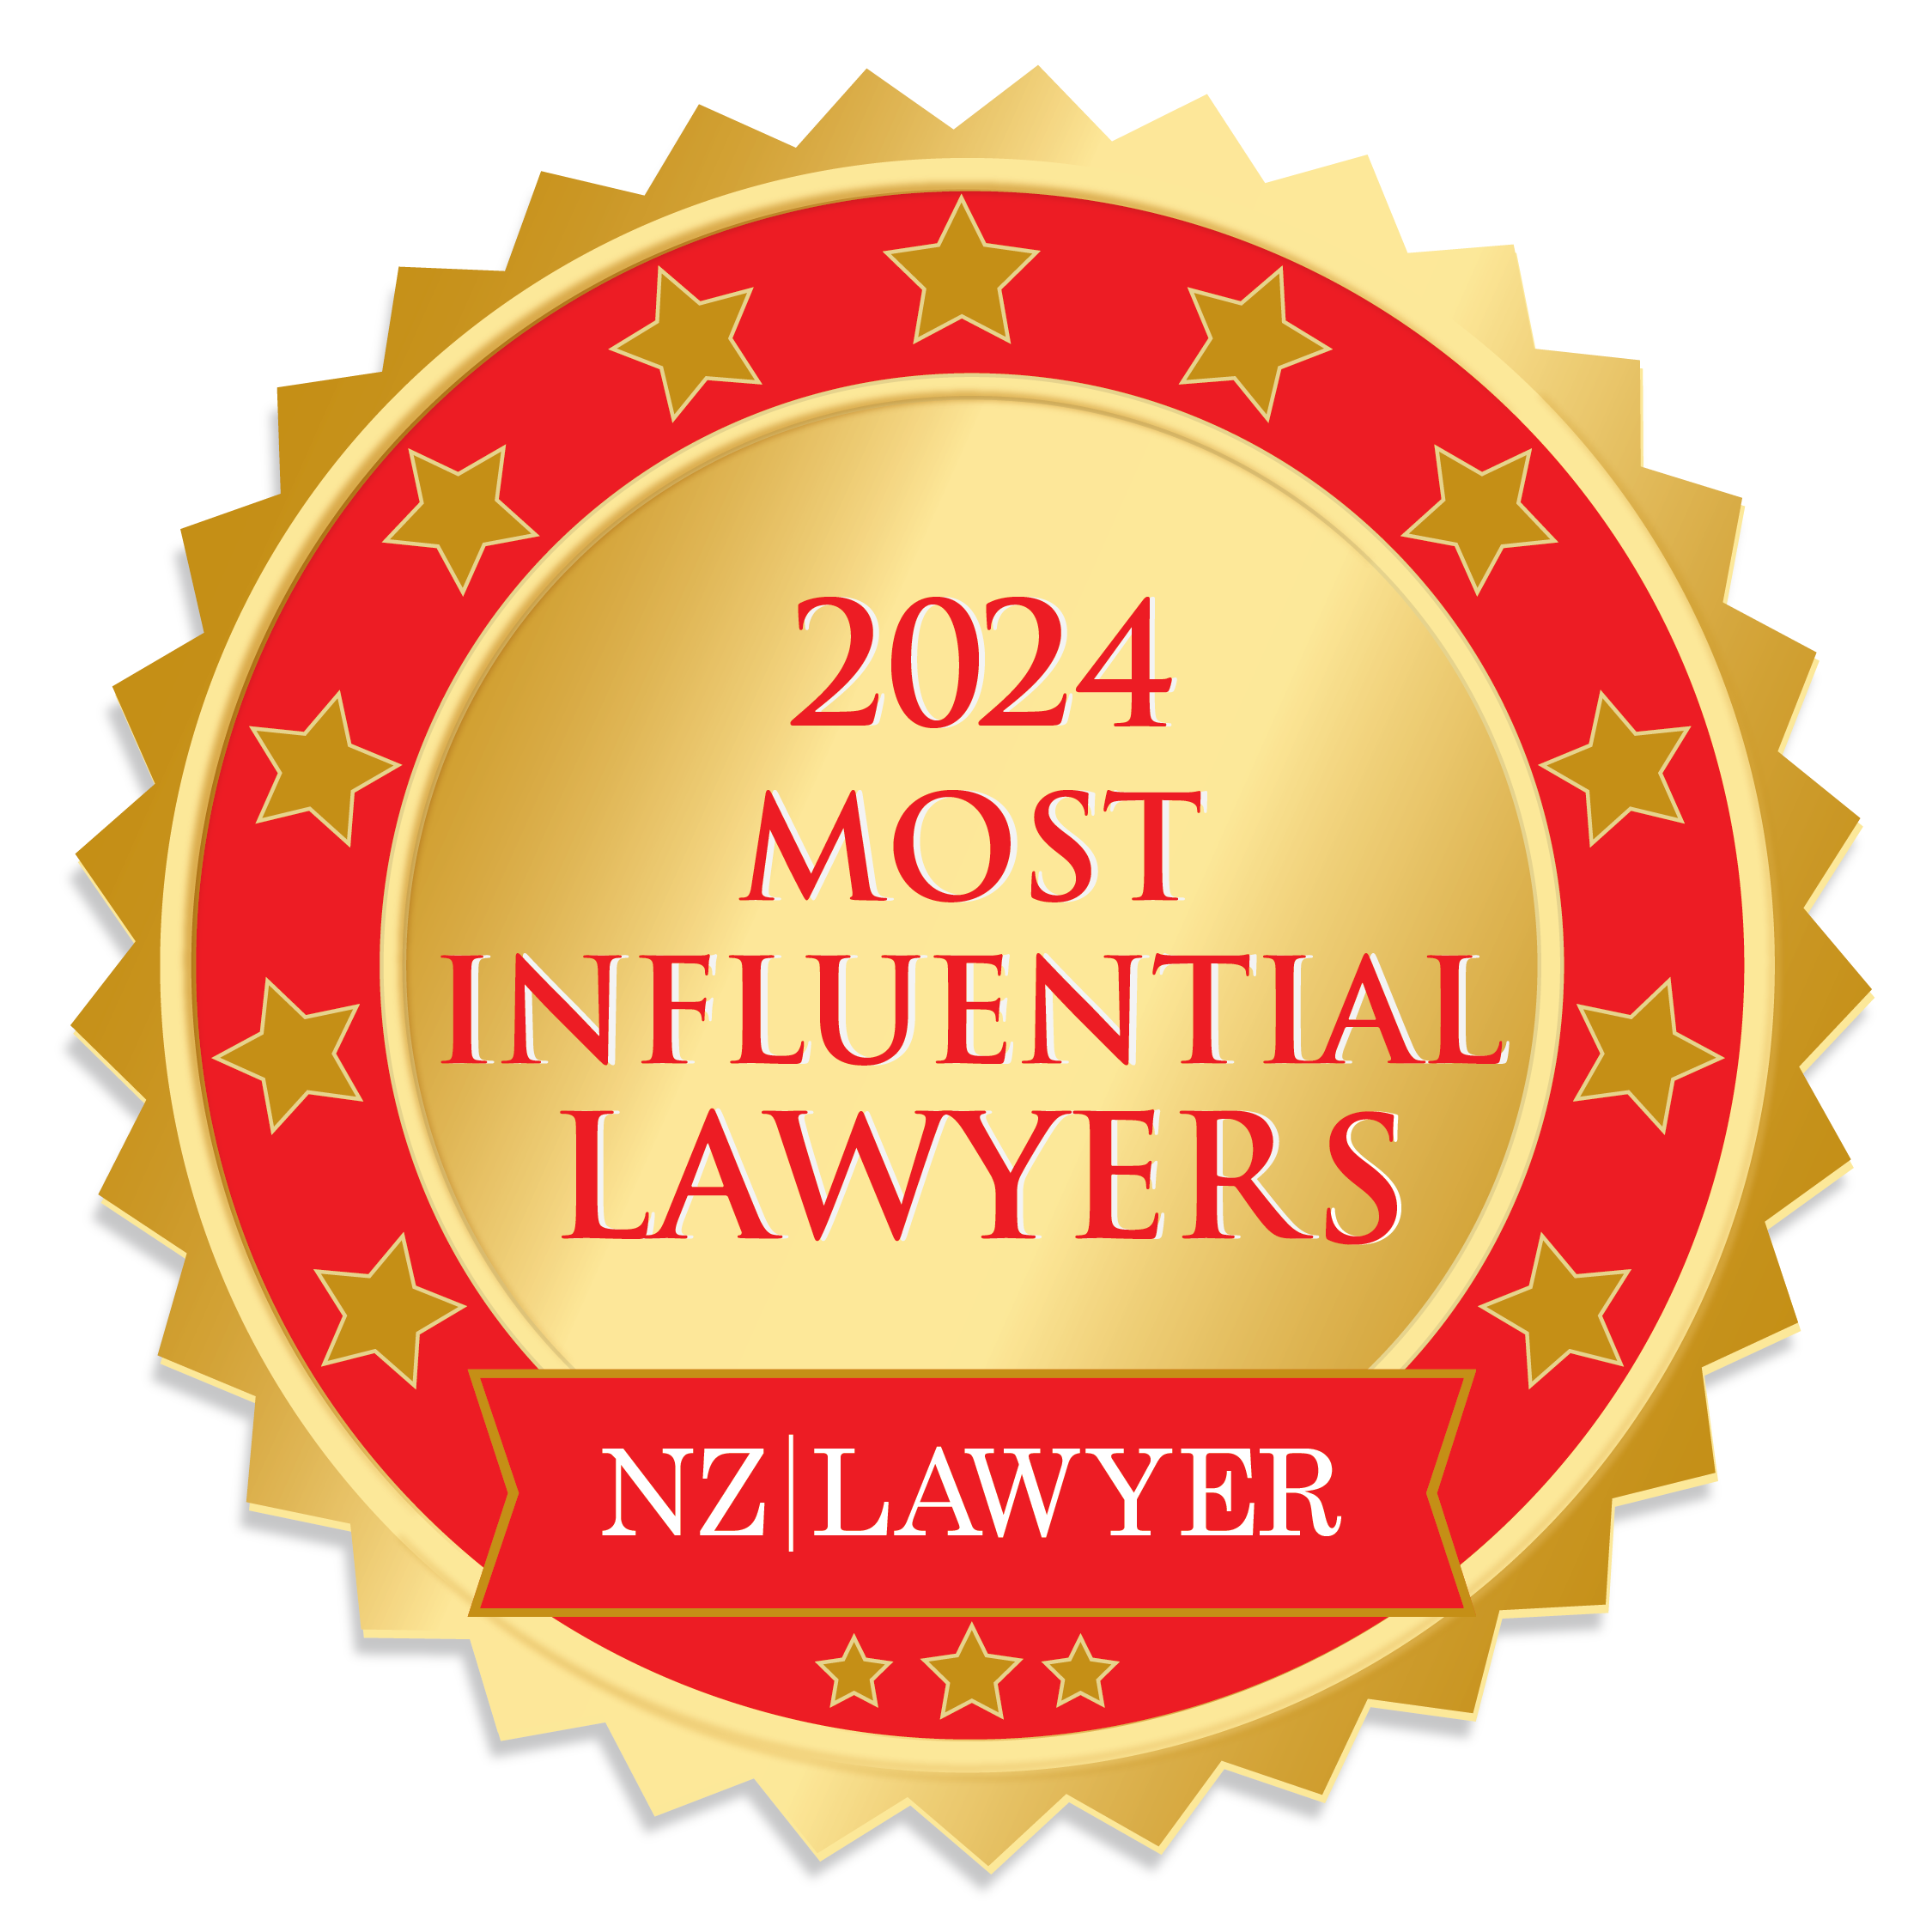 The Most Influential Lawyers in New Zealand